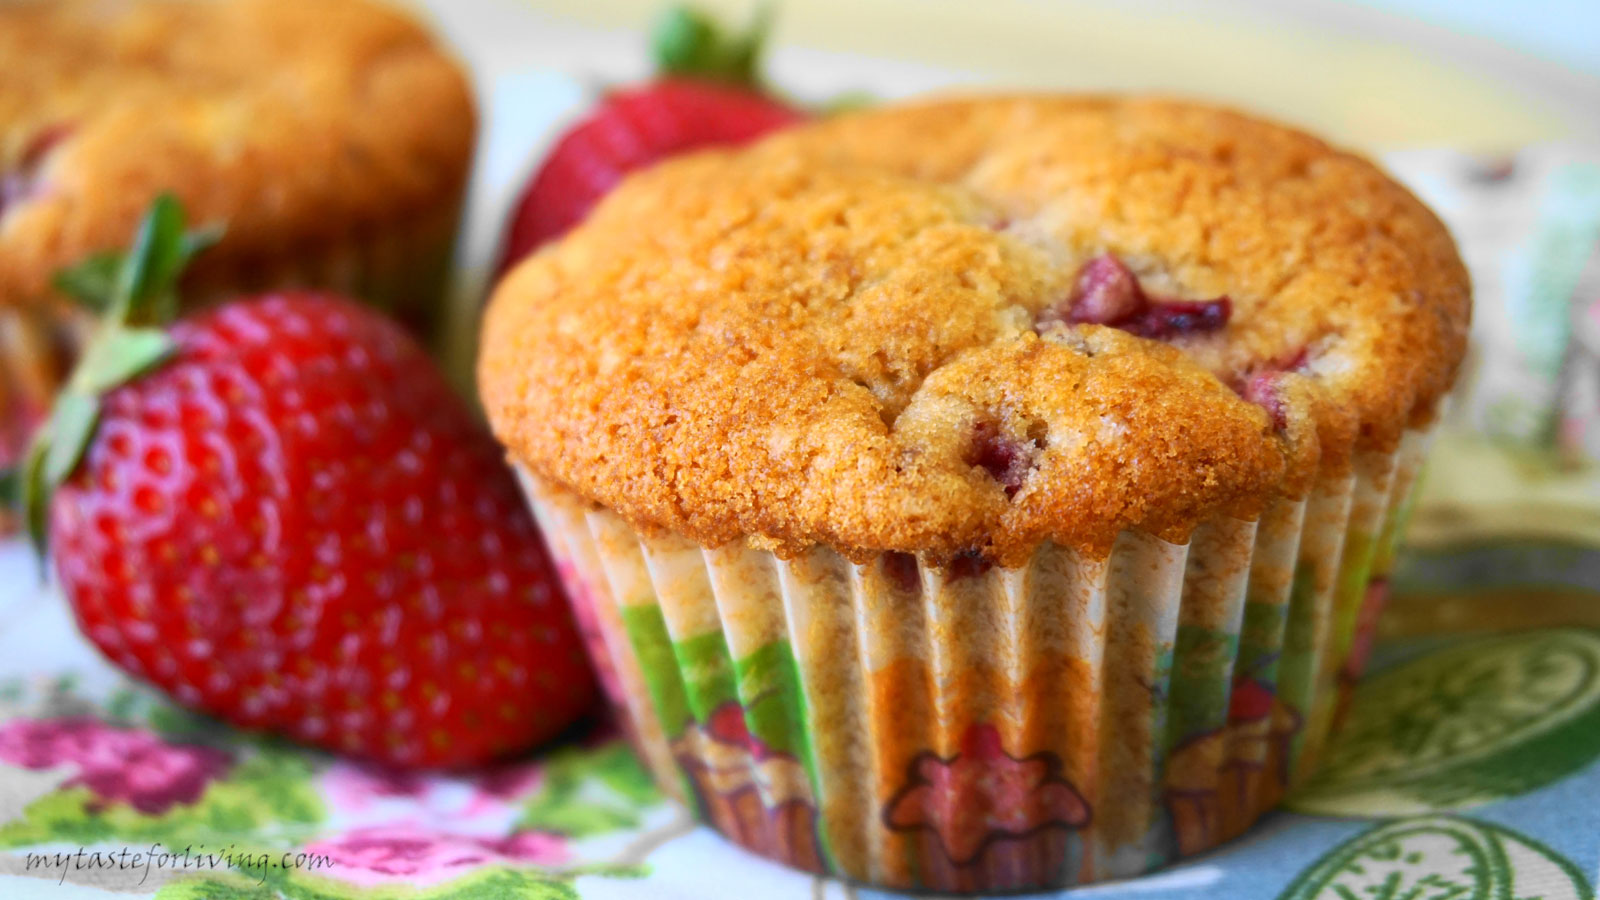 Muffins with strawberries and banana - delicious, soft, appetizing and satiating!